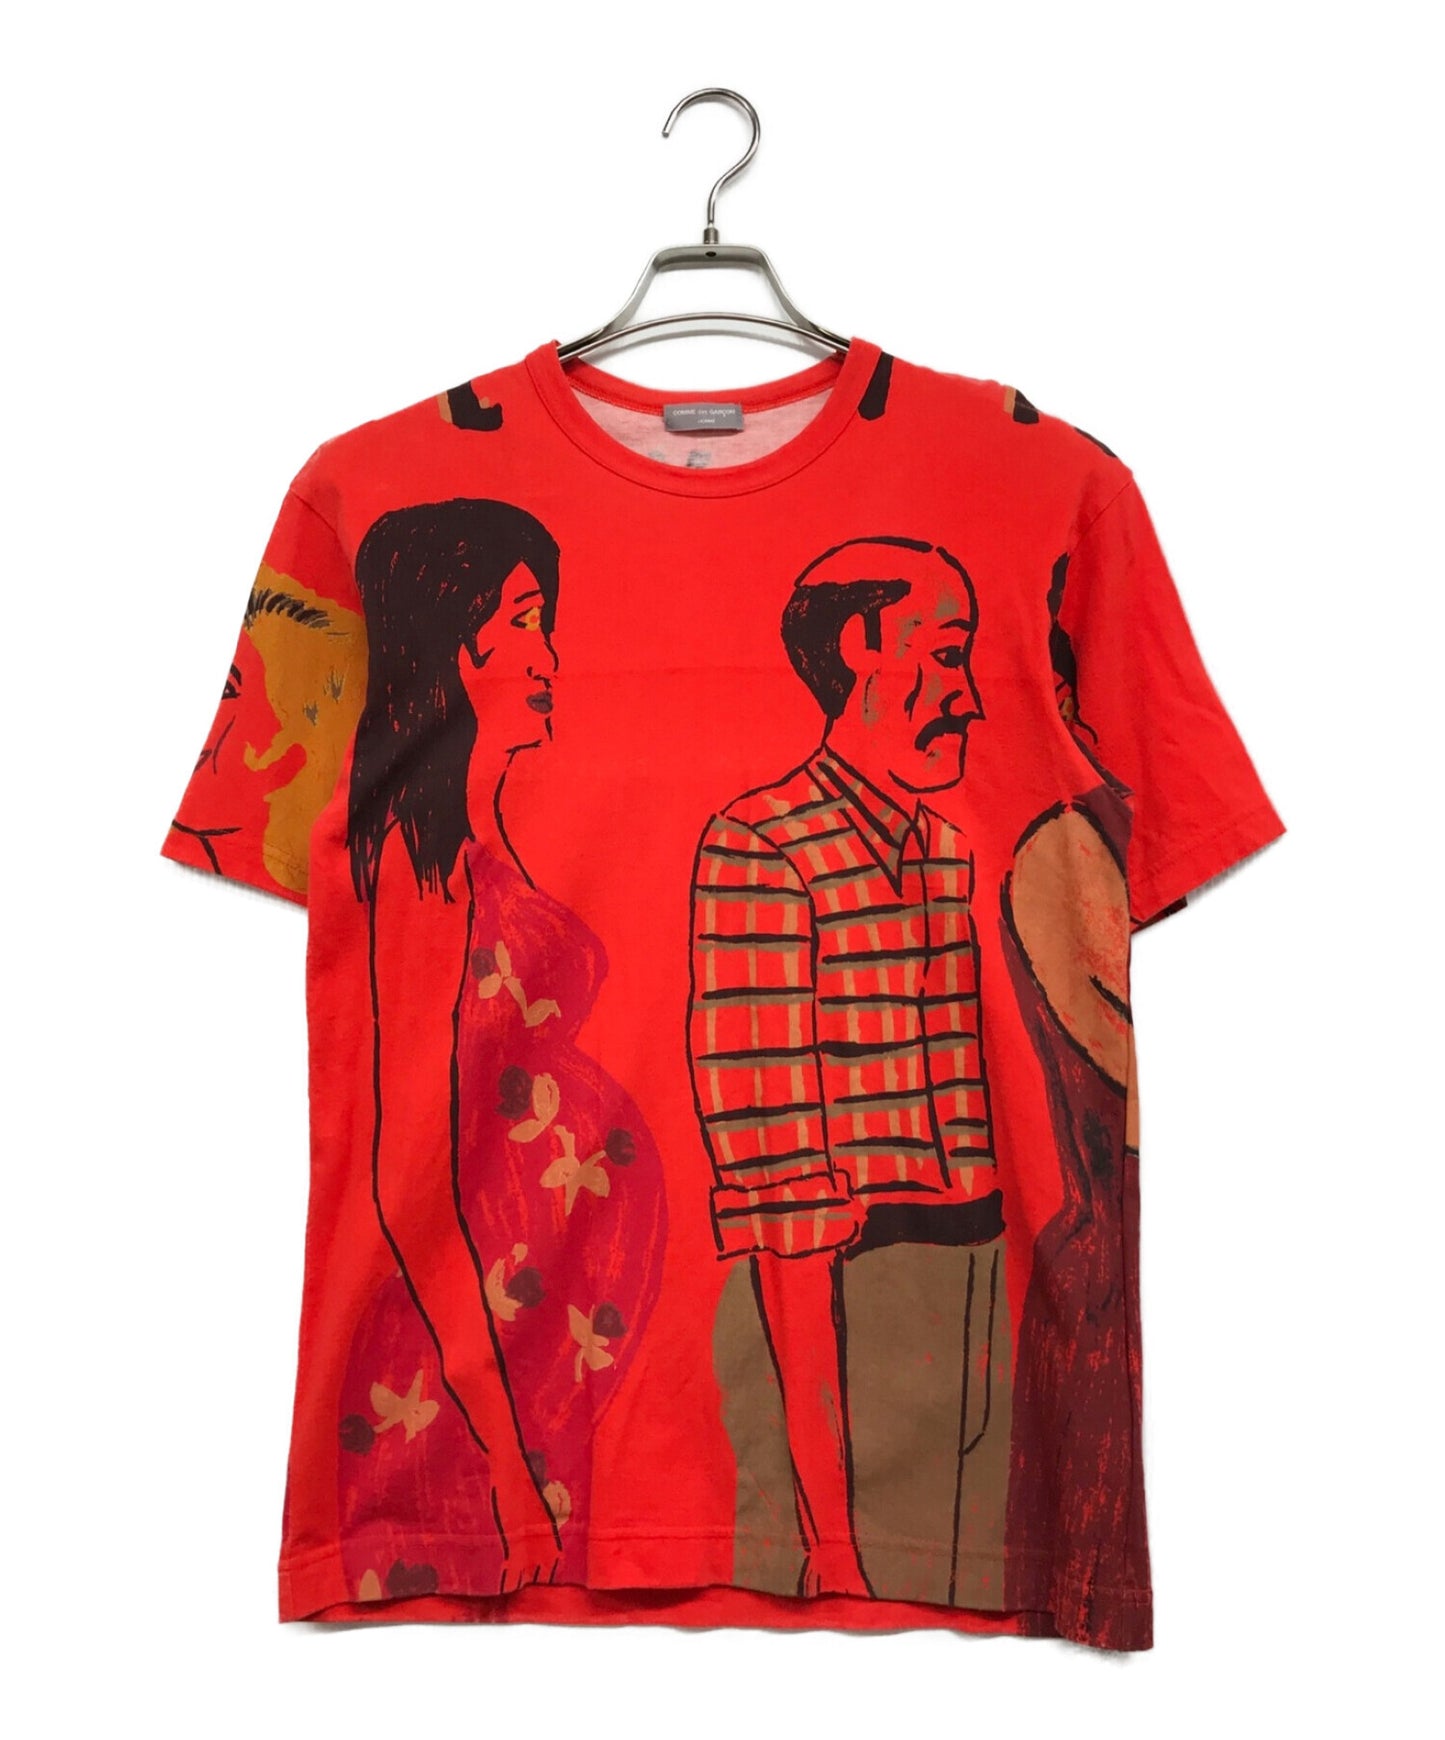 Comme des Garcons Homme Cuban Priay Printing T-Shirt